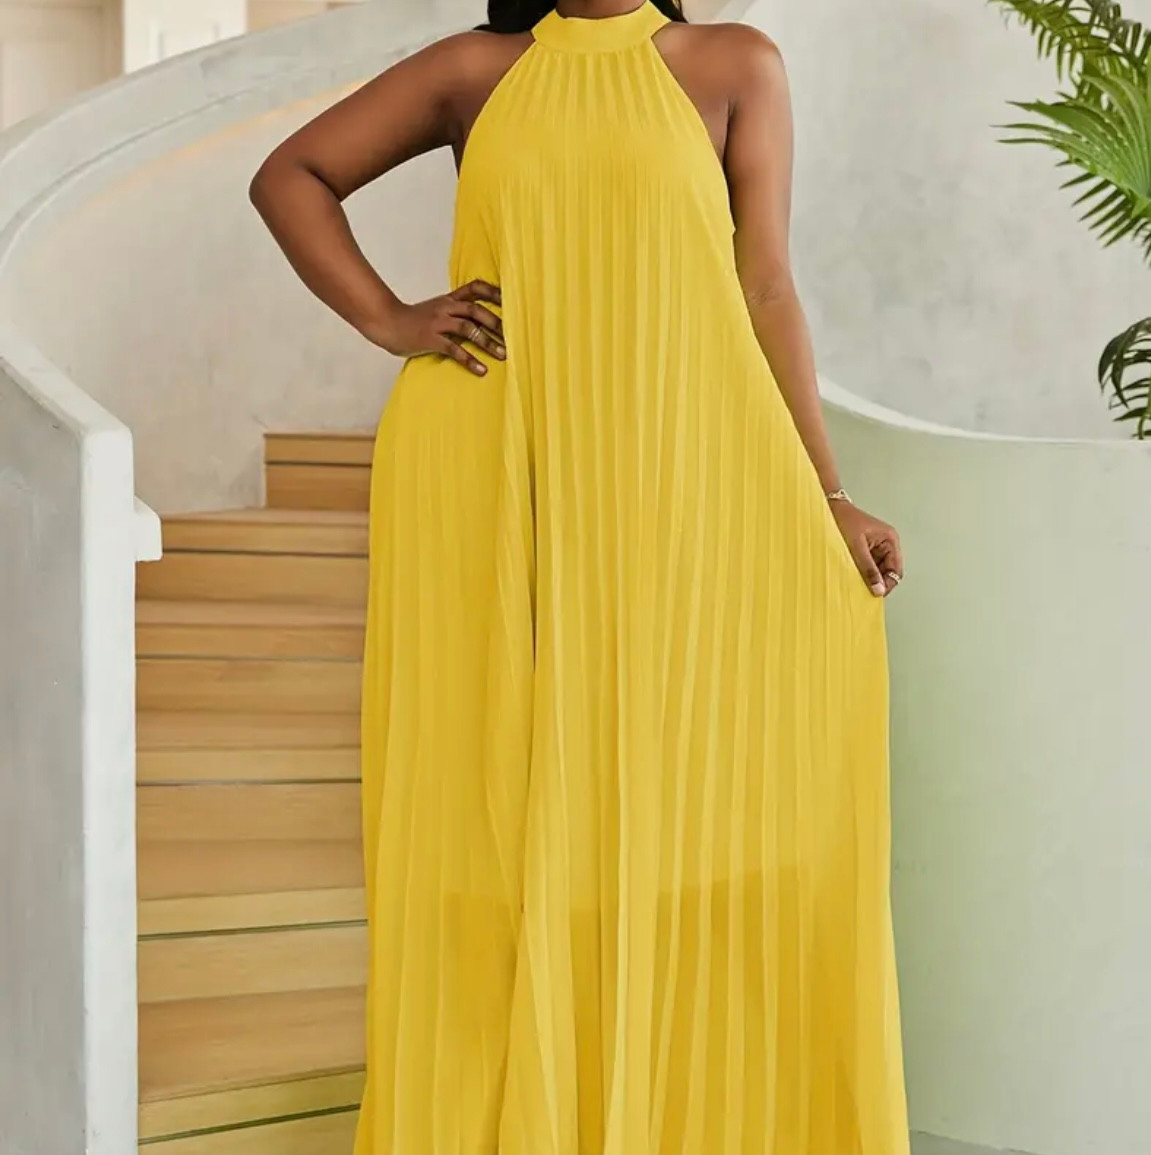 Check out our Lois Pleated  Maxi Dress at wix.to/uuaxaDl
#checkitout